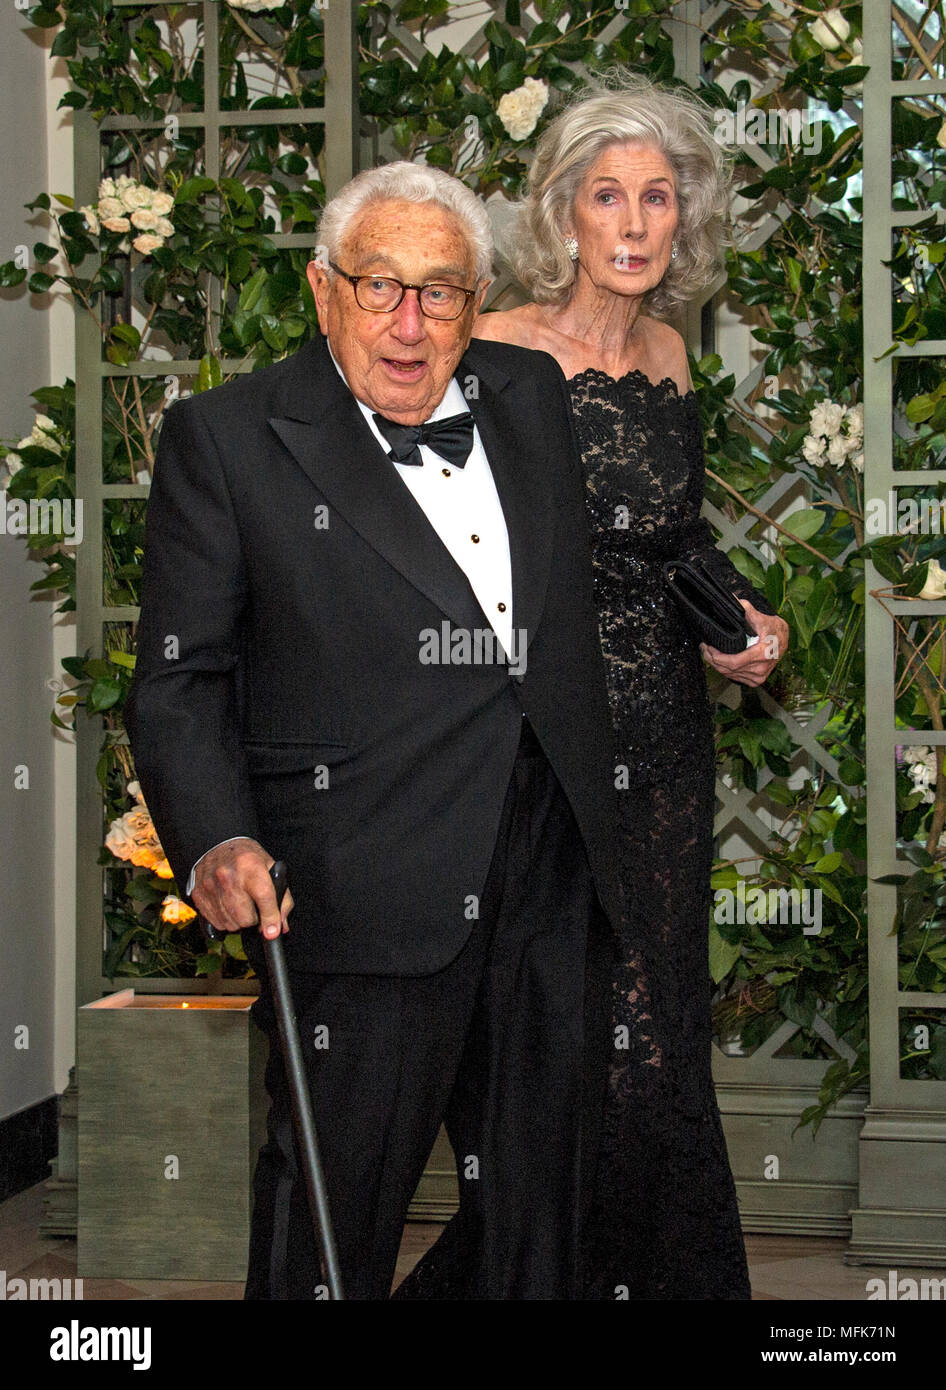 Washington, USA. 24th Apr, 2018. Former United States Secretary of State Henry A. Kissinger and Nancy Kissinger arrive for the State Dinner honoring Dinner honoring President Emmanuel Macron of the French Republic and Mrs. Brigitte Macron at the White House in Washington, DC on Tuesday, April 24, 2018. Credit: Ron Sachs/CNP - NO WIRE SERVICE - Credit: Ron Sachs/Consolidated News Photos/Ron Sachs - CNP/dpa/Alamy Live News Stock Photo